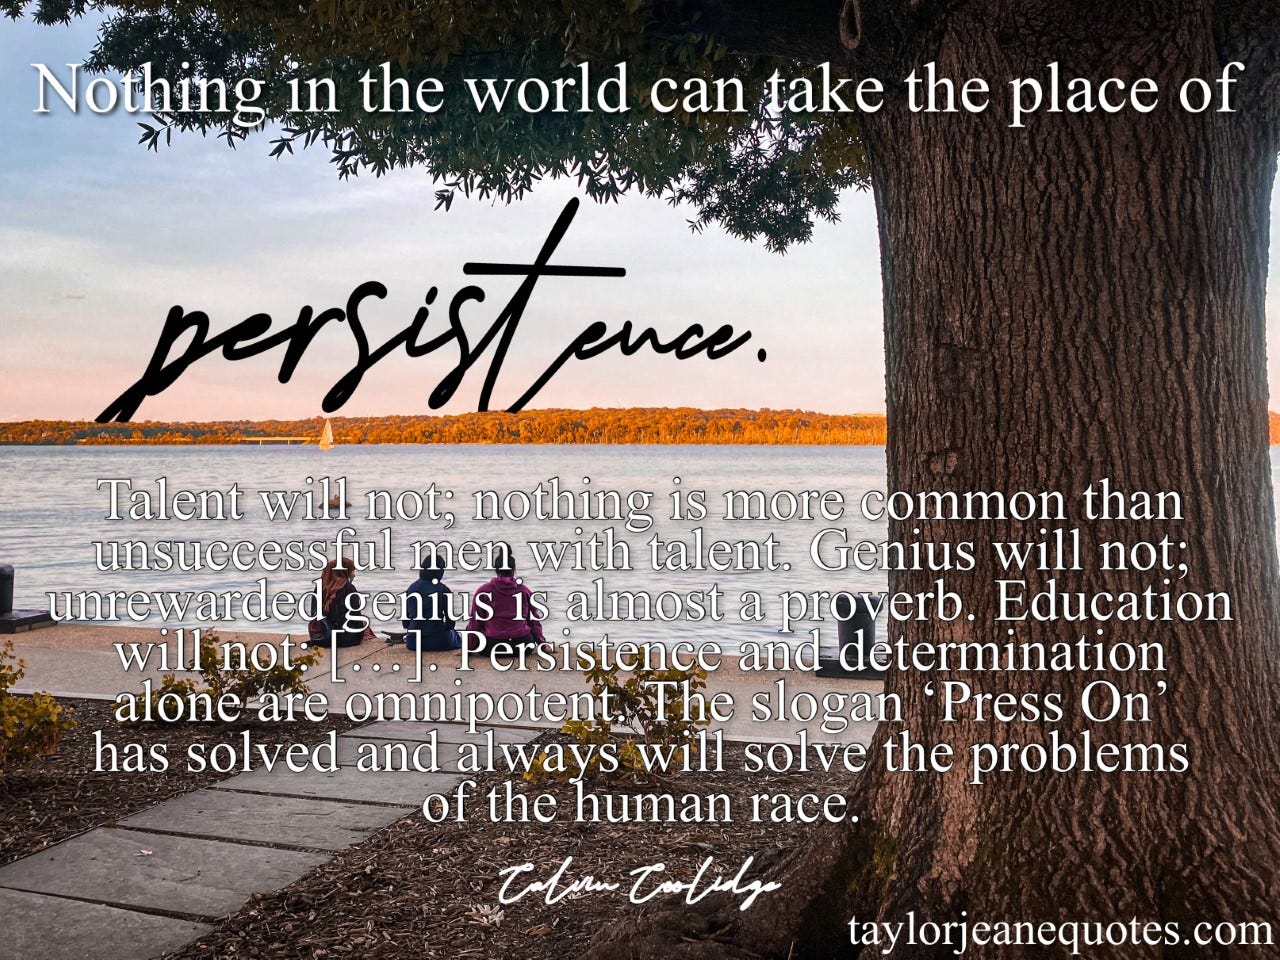 taylor jeane quotes, taylor jeane, taylor wilson, inspirational daily quotes, quote of the day subscription free, calvin coolidge, calvin coolidge quotes, persistence, persistence quotes, define persistence, importance of persistence, washington dc, potomac river, potomac dc, talent quotes, genius quotes, education quotes, smart quotes, intelligence quotes, keep going quotes, never give up quotes, motivational quotes, determination quotes, goal quotes, monday quotes, problem solving quotes, how to stay determined, how to have persistence, press on quotes, life quotes, life lesson quotes, truthful quotes